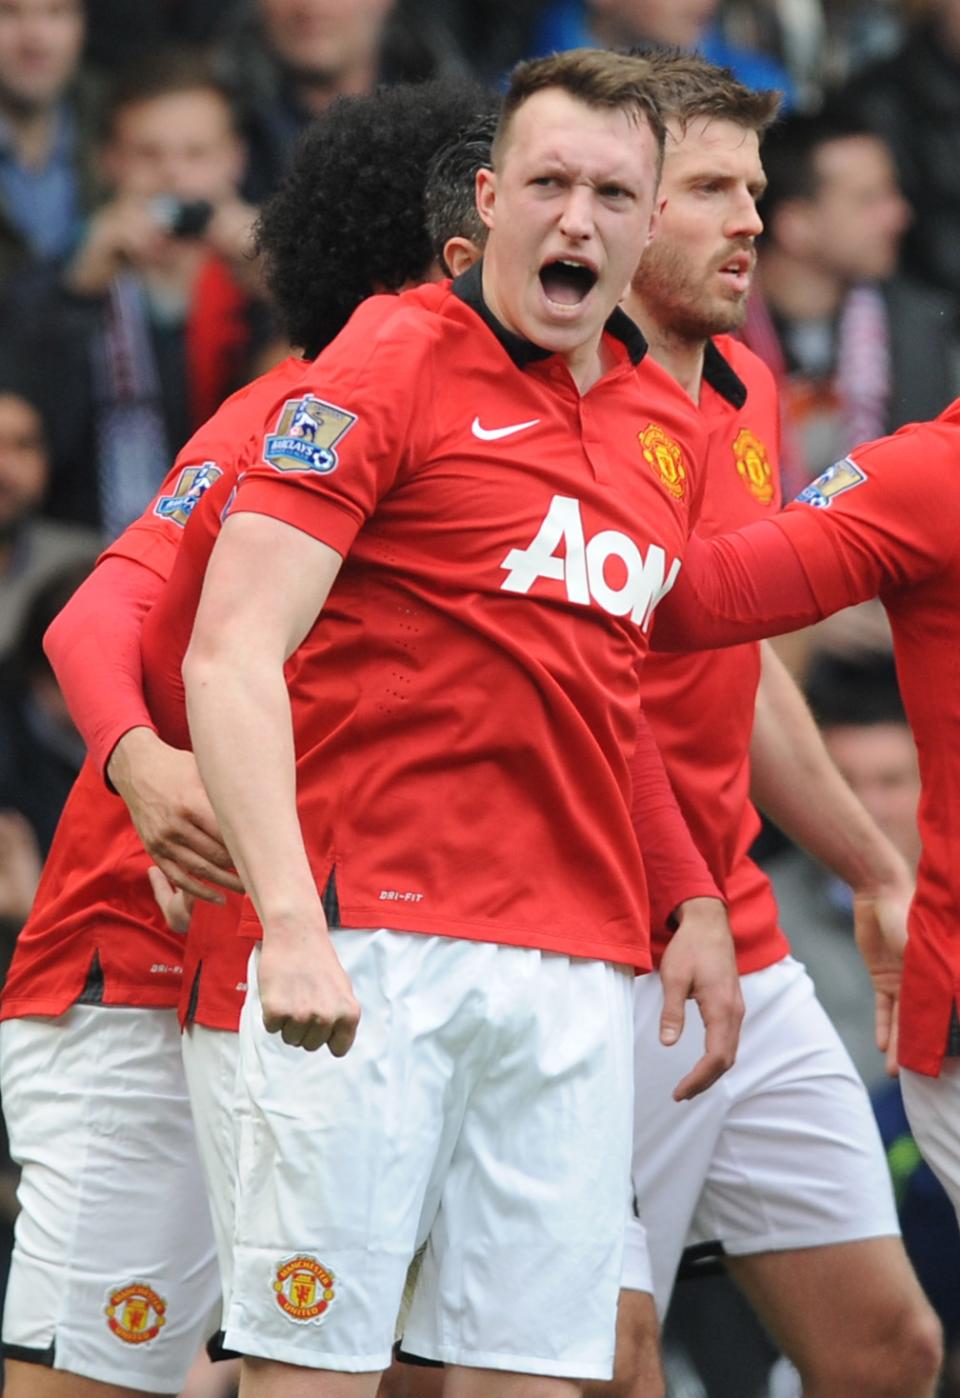 Manchester United's Phil Jones celebrates after scoring against West Brom during the English Premier League soccer match between West Bromwich Albion and Manchester United at The Hawthorns Stadium in West Bromwich, England, Saturday, March 8, 2014. (AP Photo/Rui Vieira)